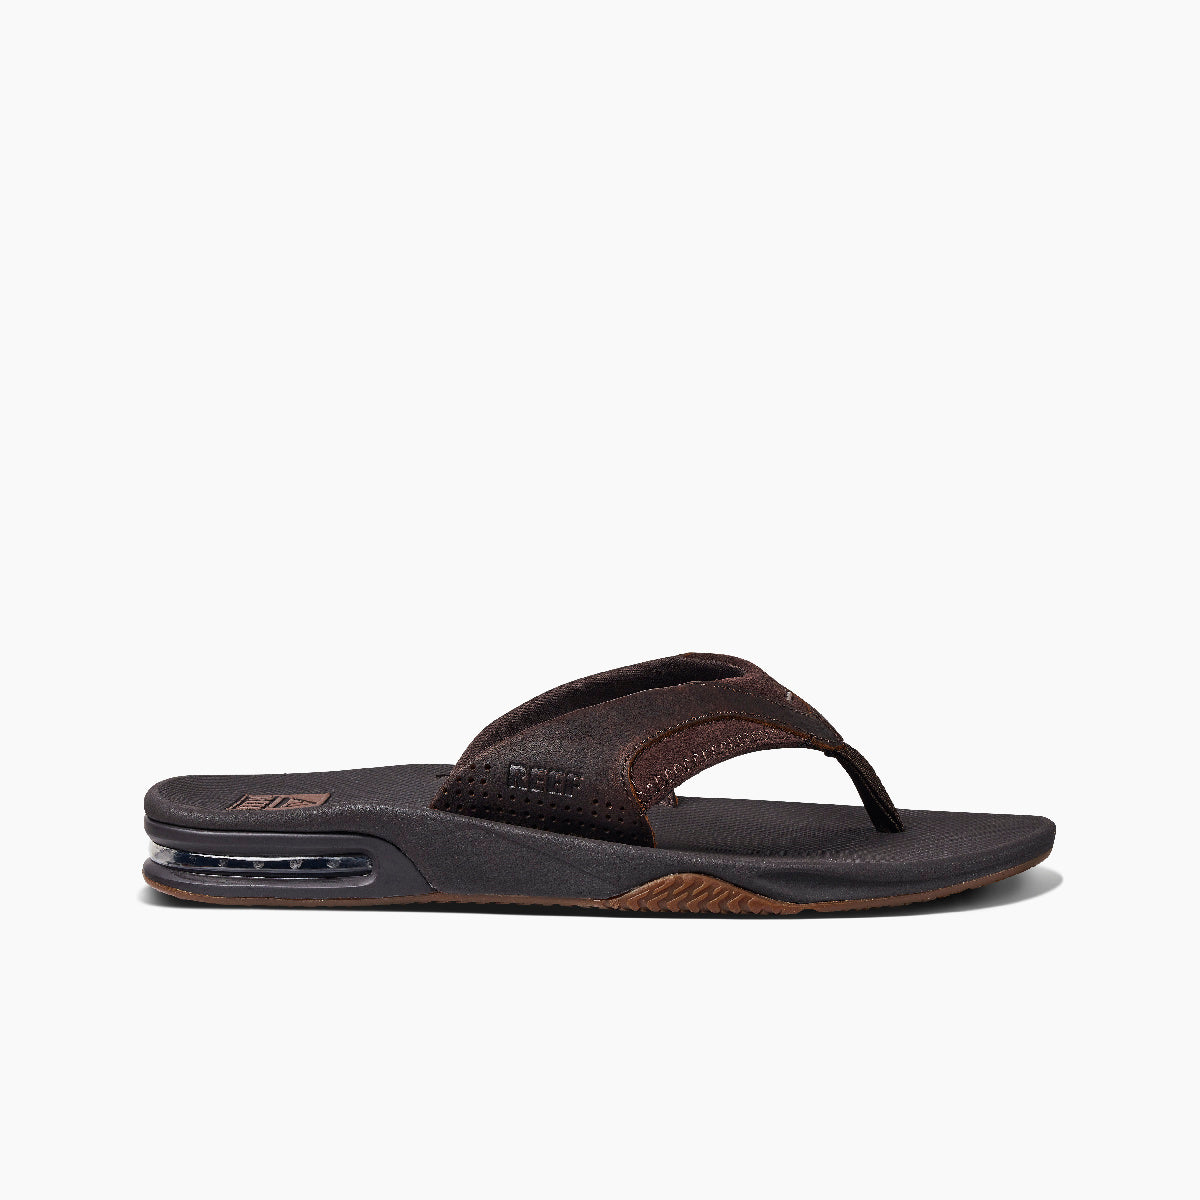 Coral Arch Support Flip Flops